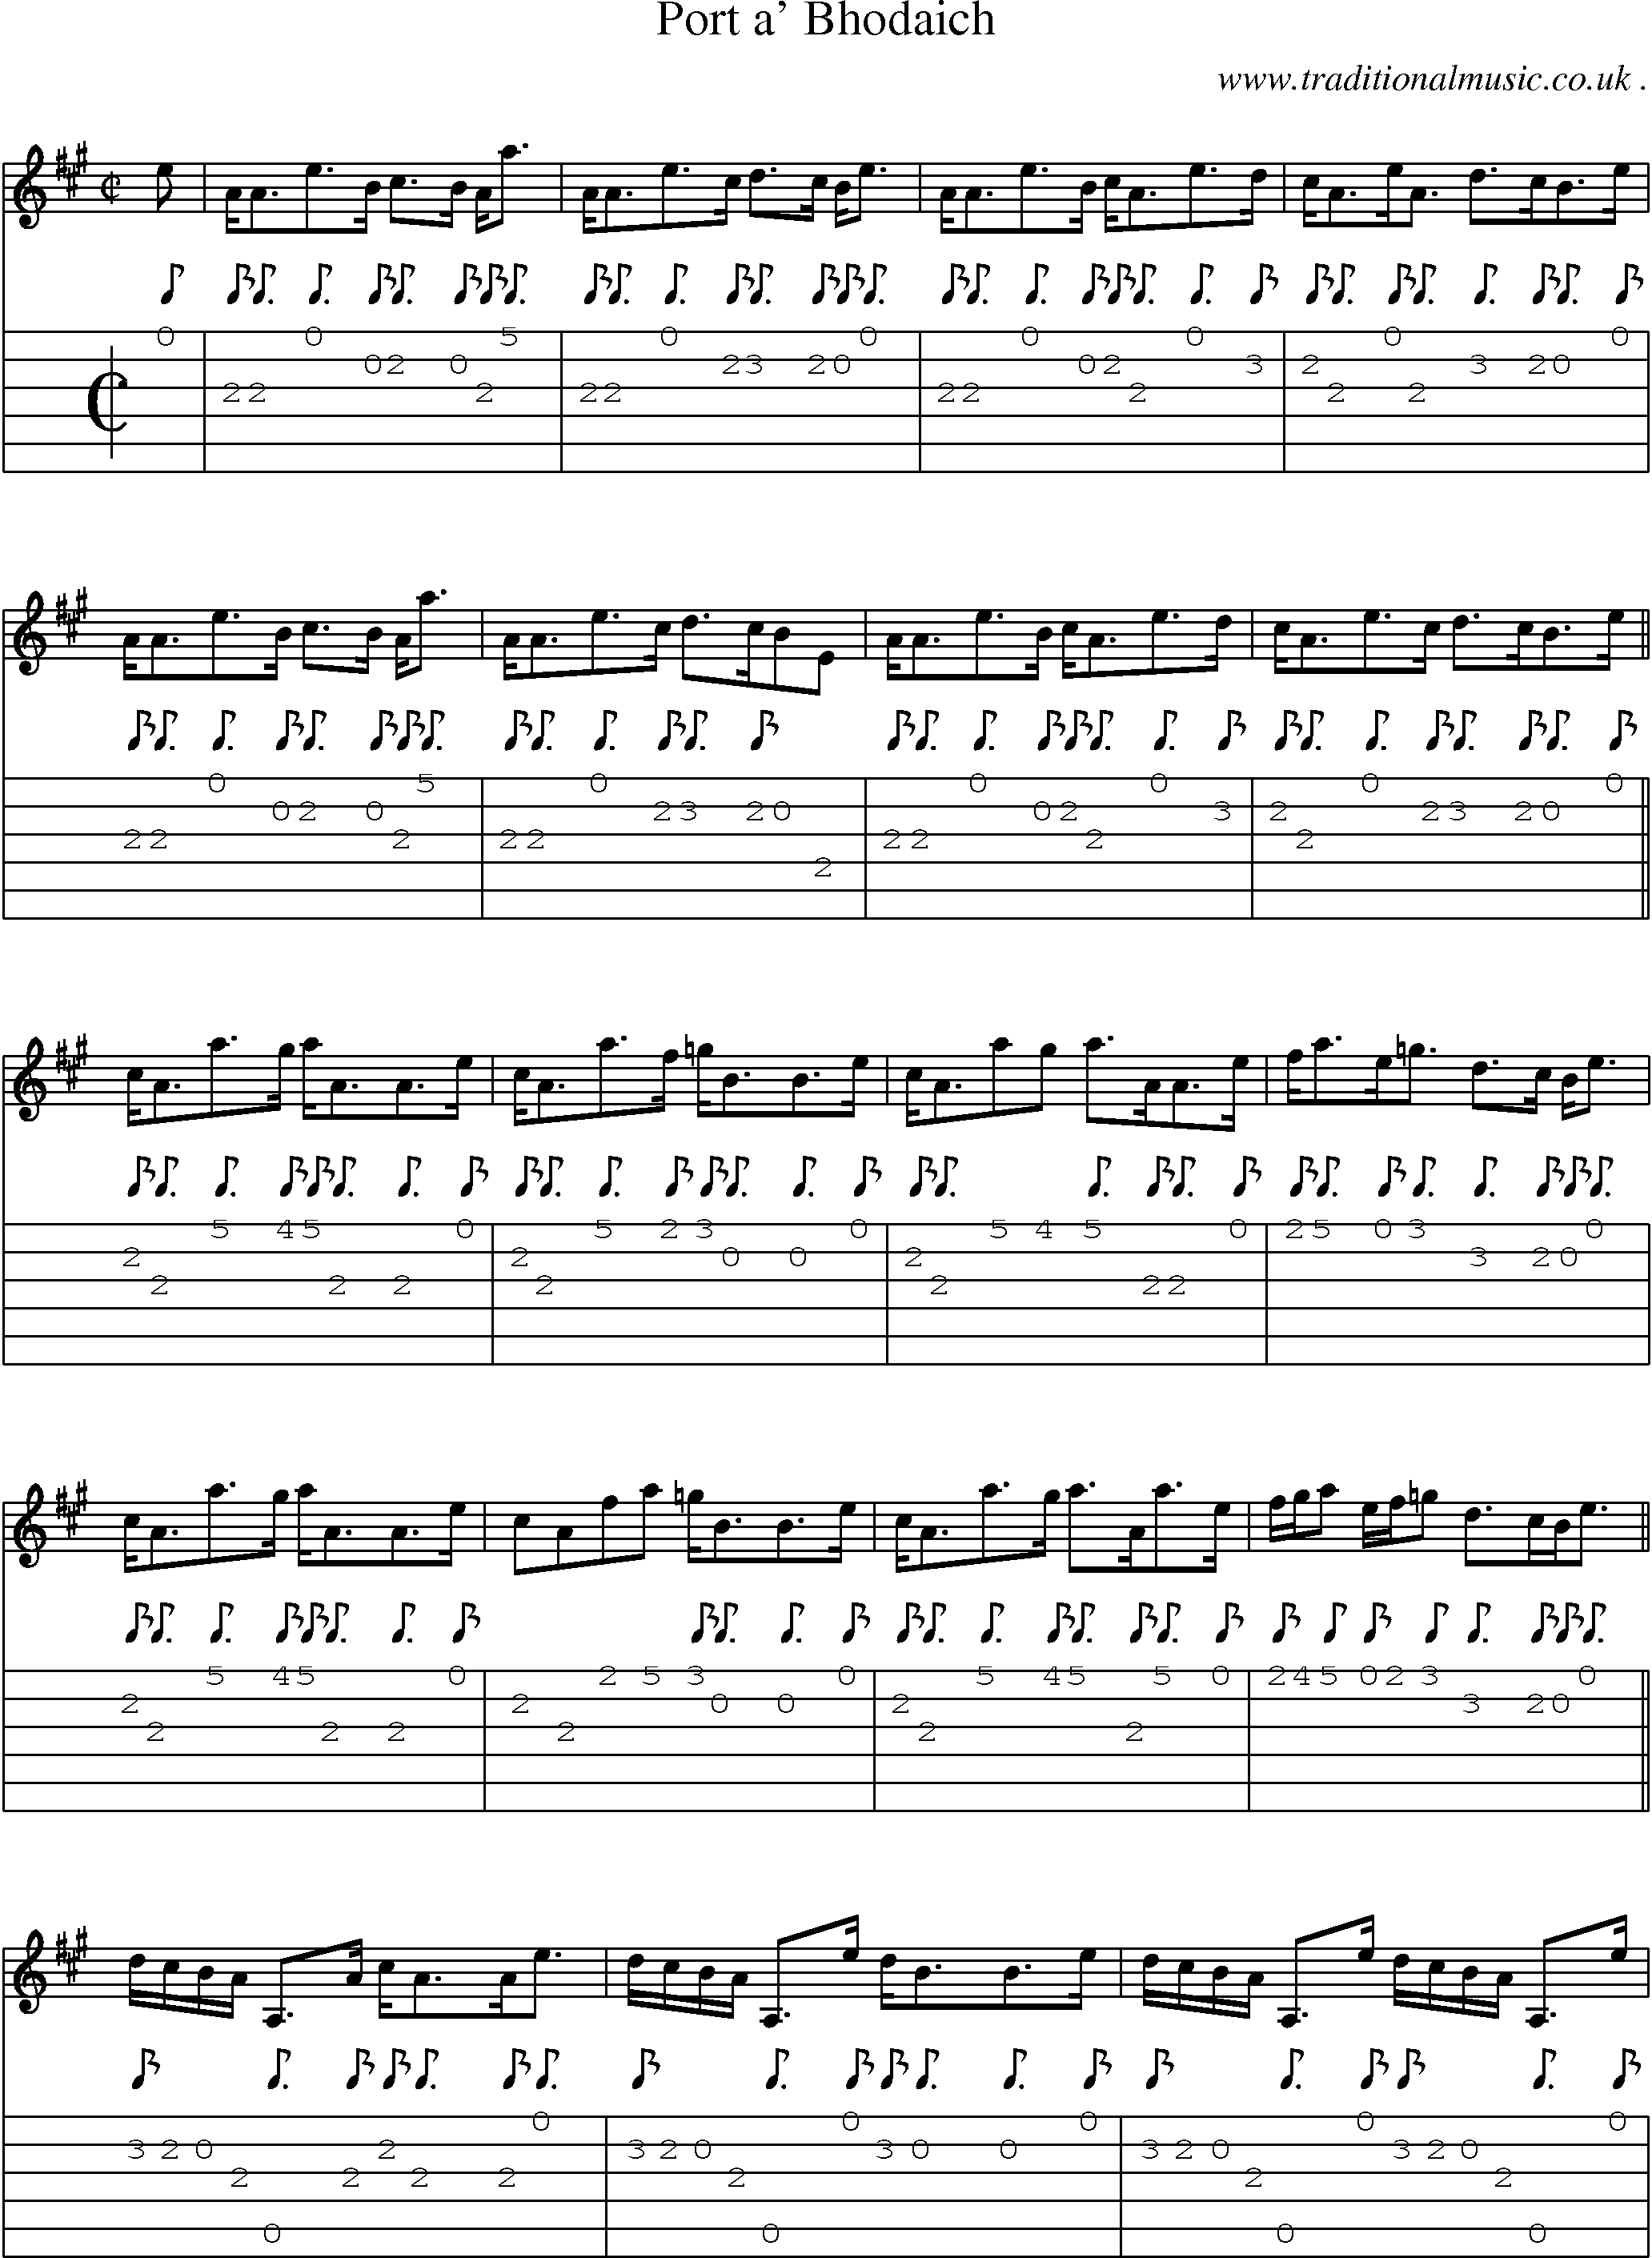 Sheet-music  score, Chords and Guitar Tabs for Port A Bhodaich